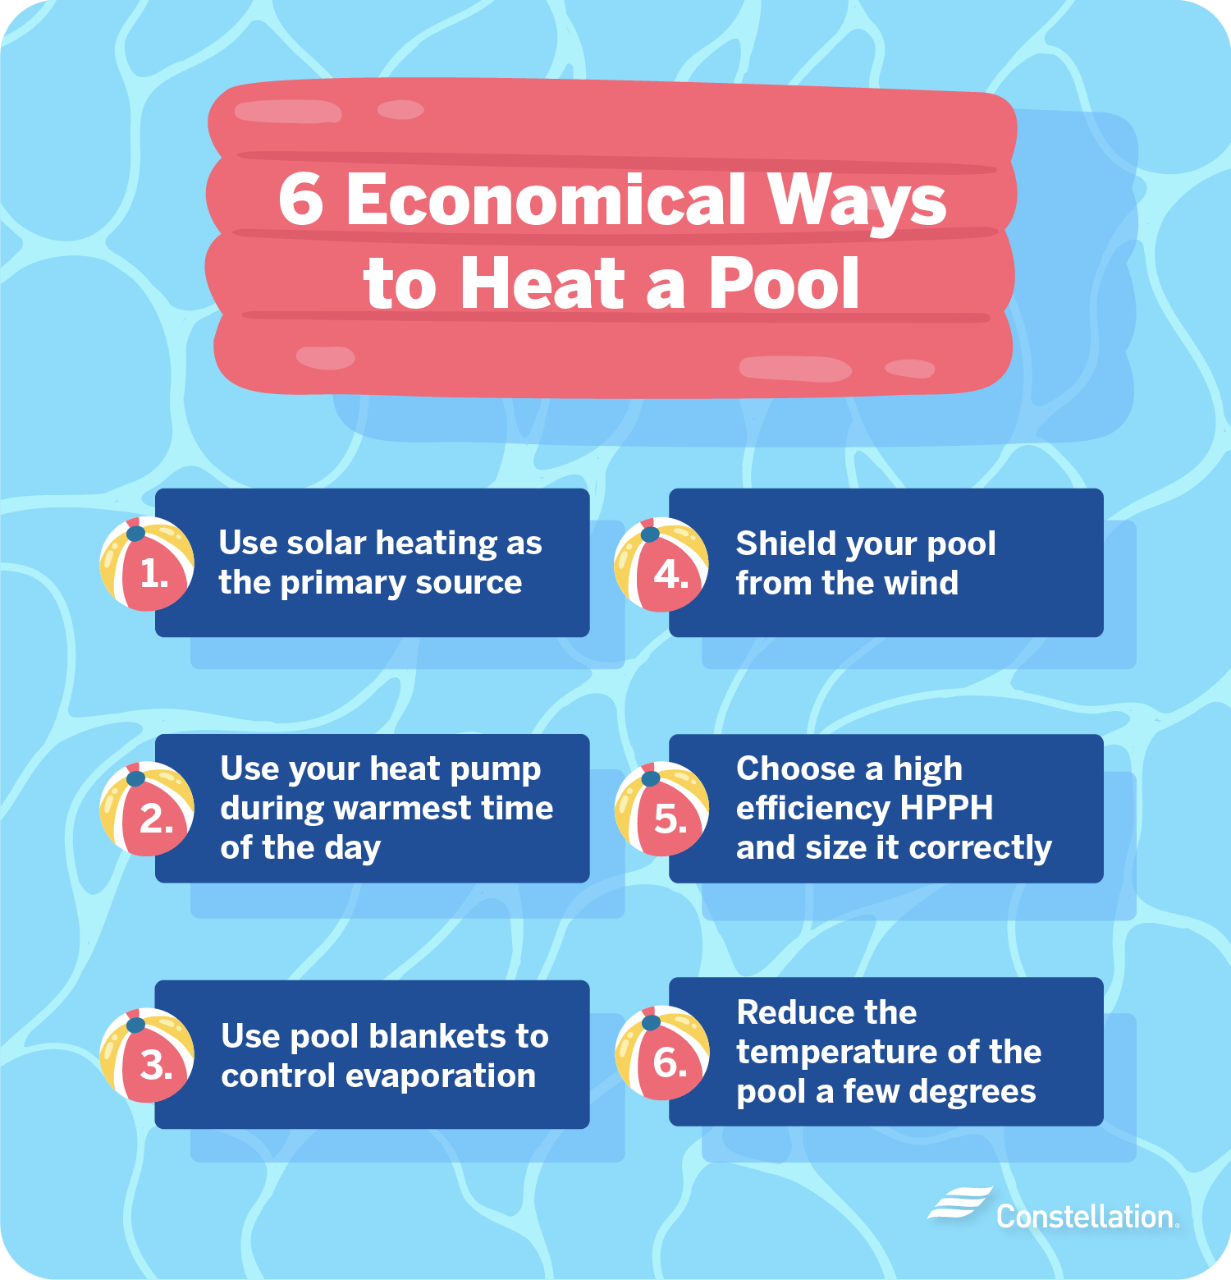 Economical ways to heat a pool.